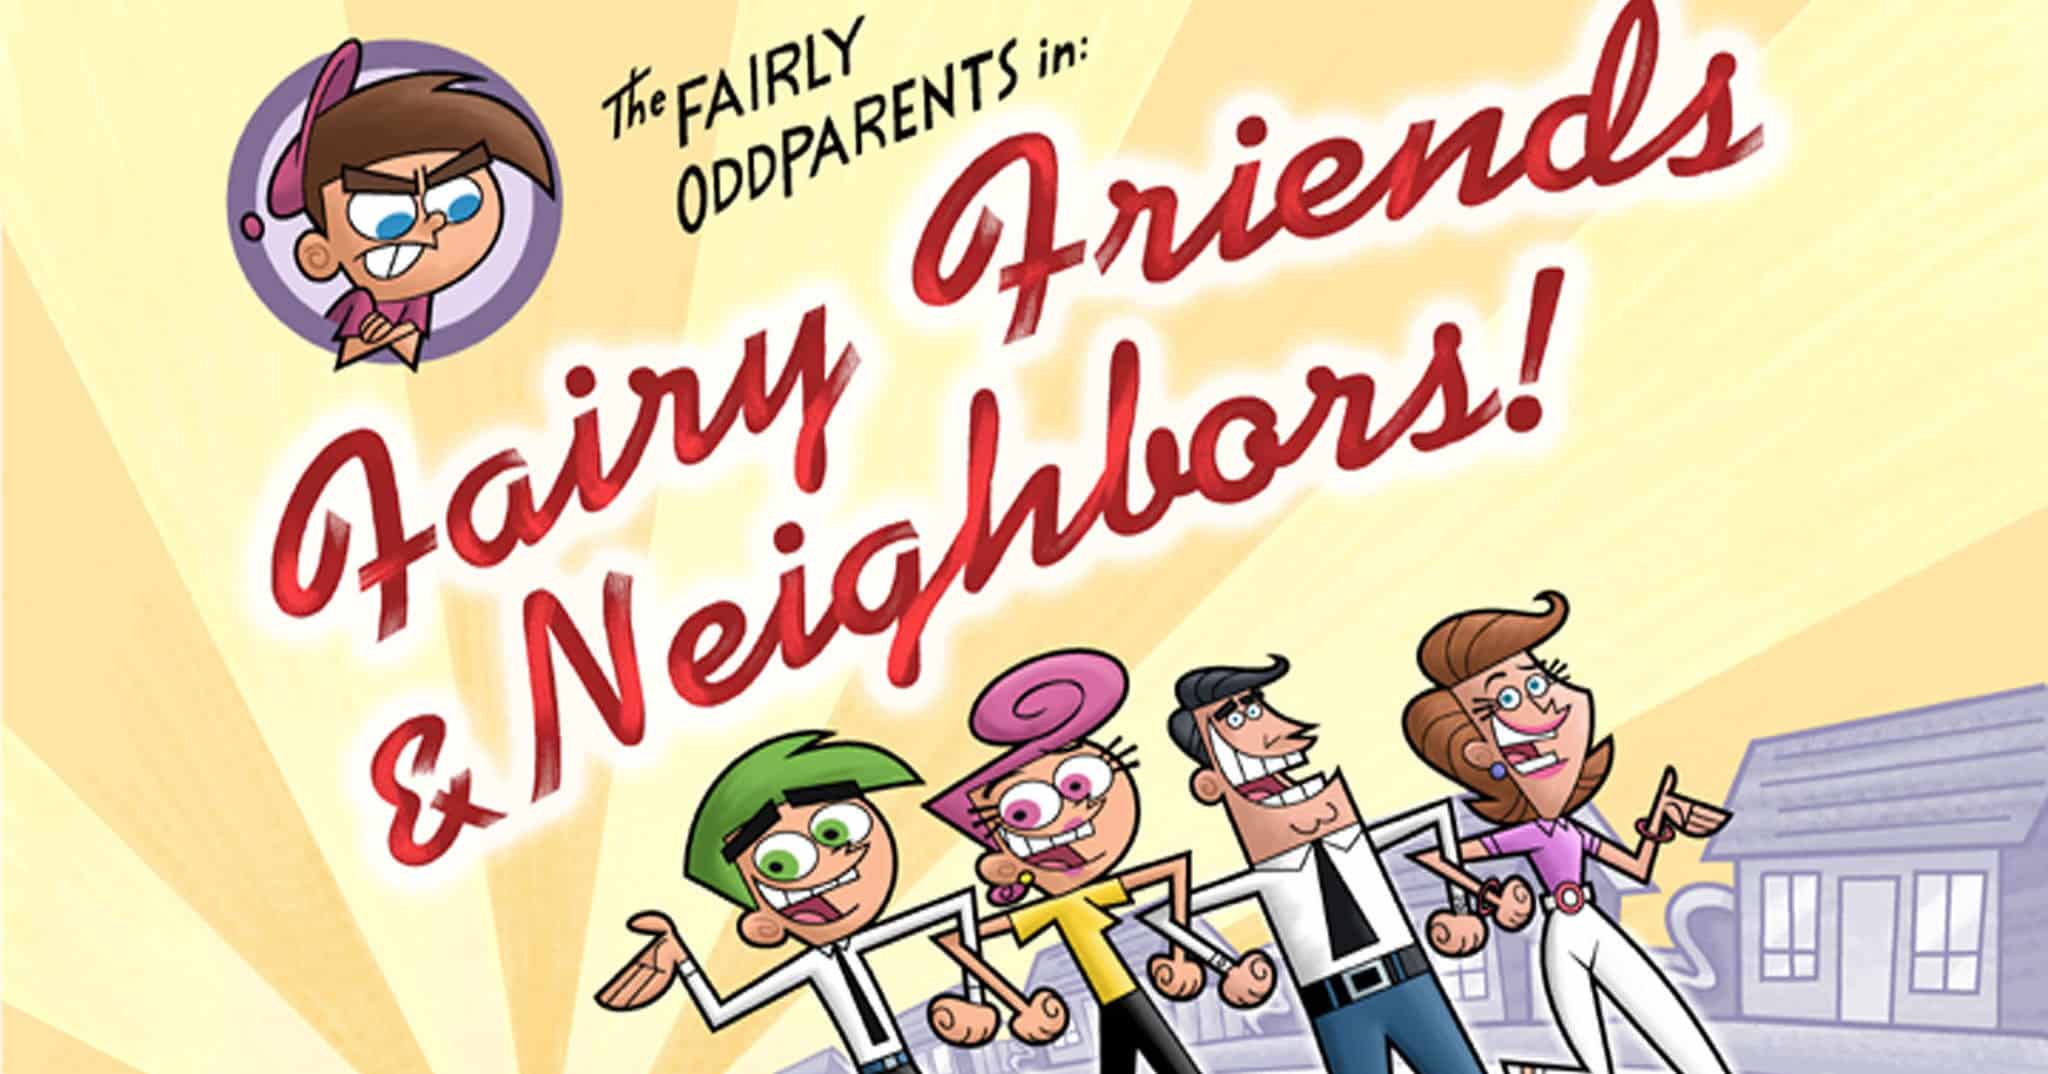 A graphic depicts the characters and title of Fairy Friends and Neighbors.